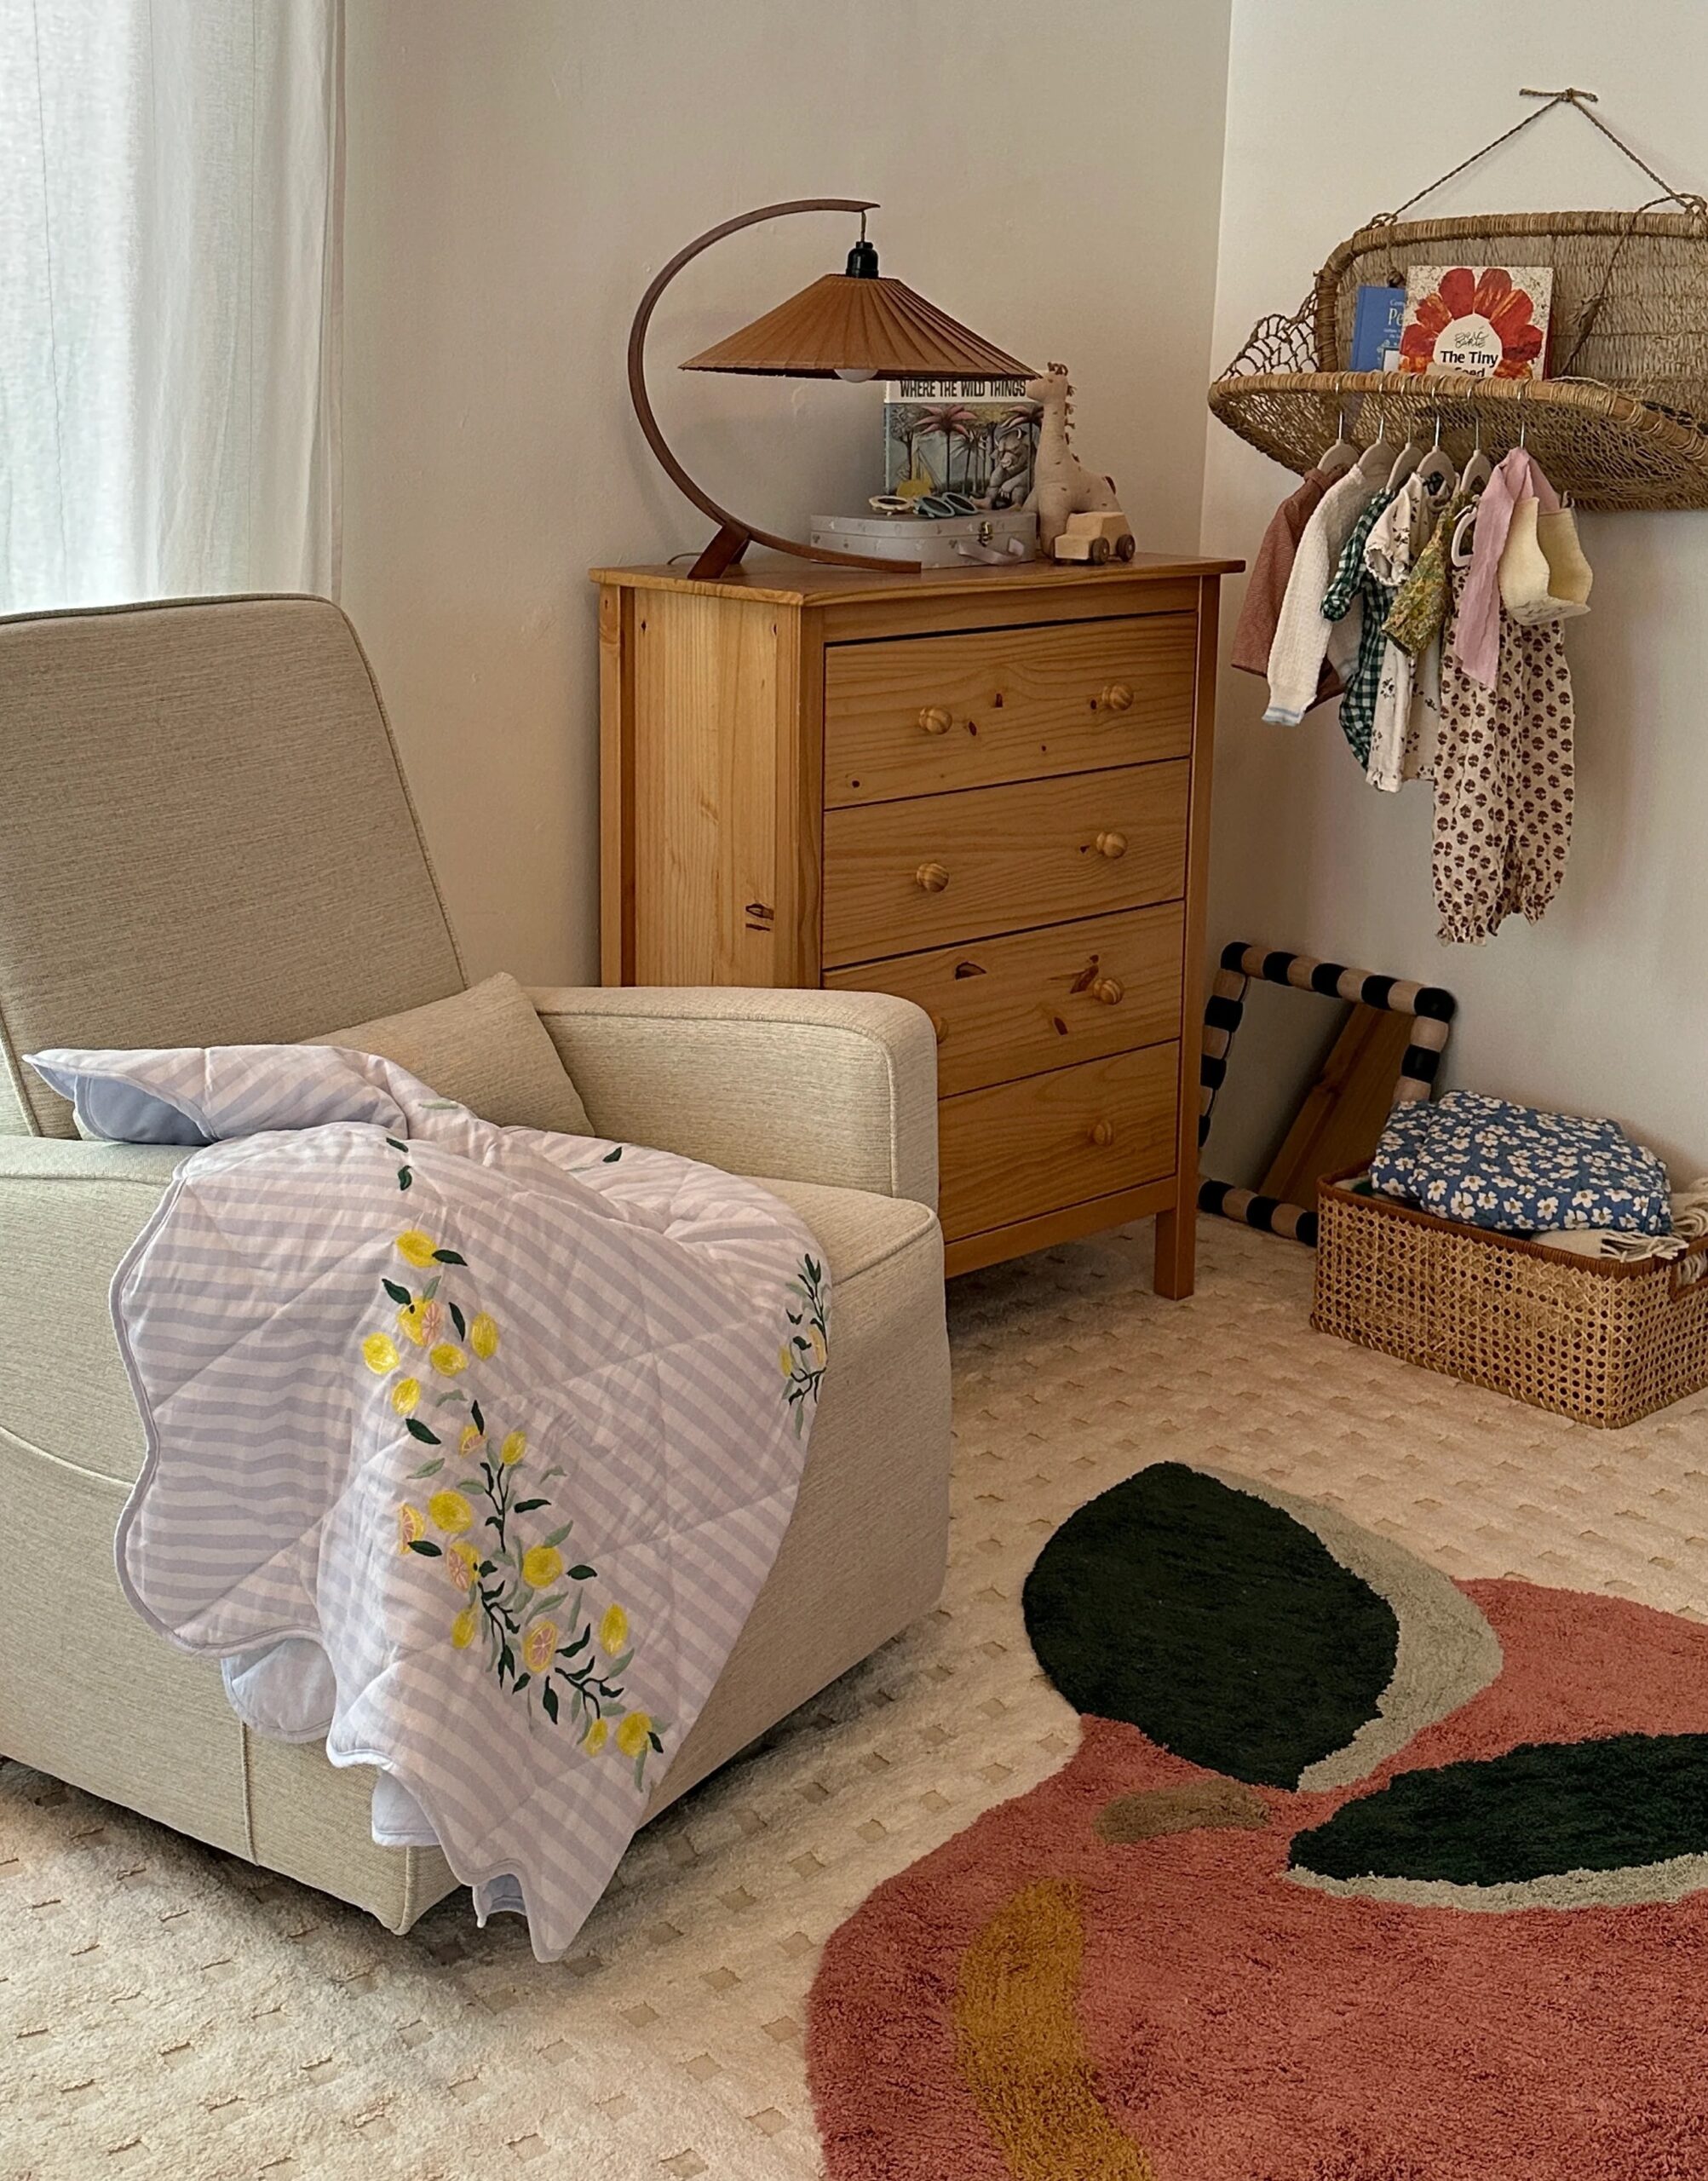 A cozy nursery with an armchair draped with a blanket, a wooden dresser with a lamp and decor, a hanging rack with baby clothes, and a patterned rug on a carpeted floor.